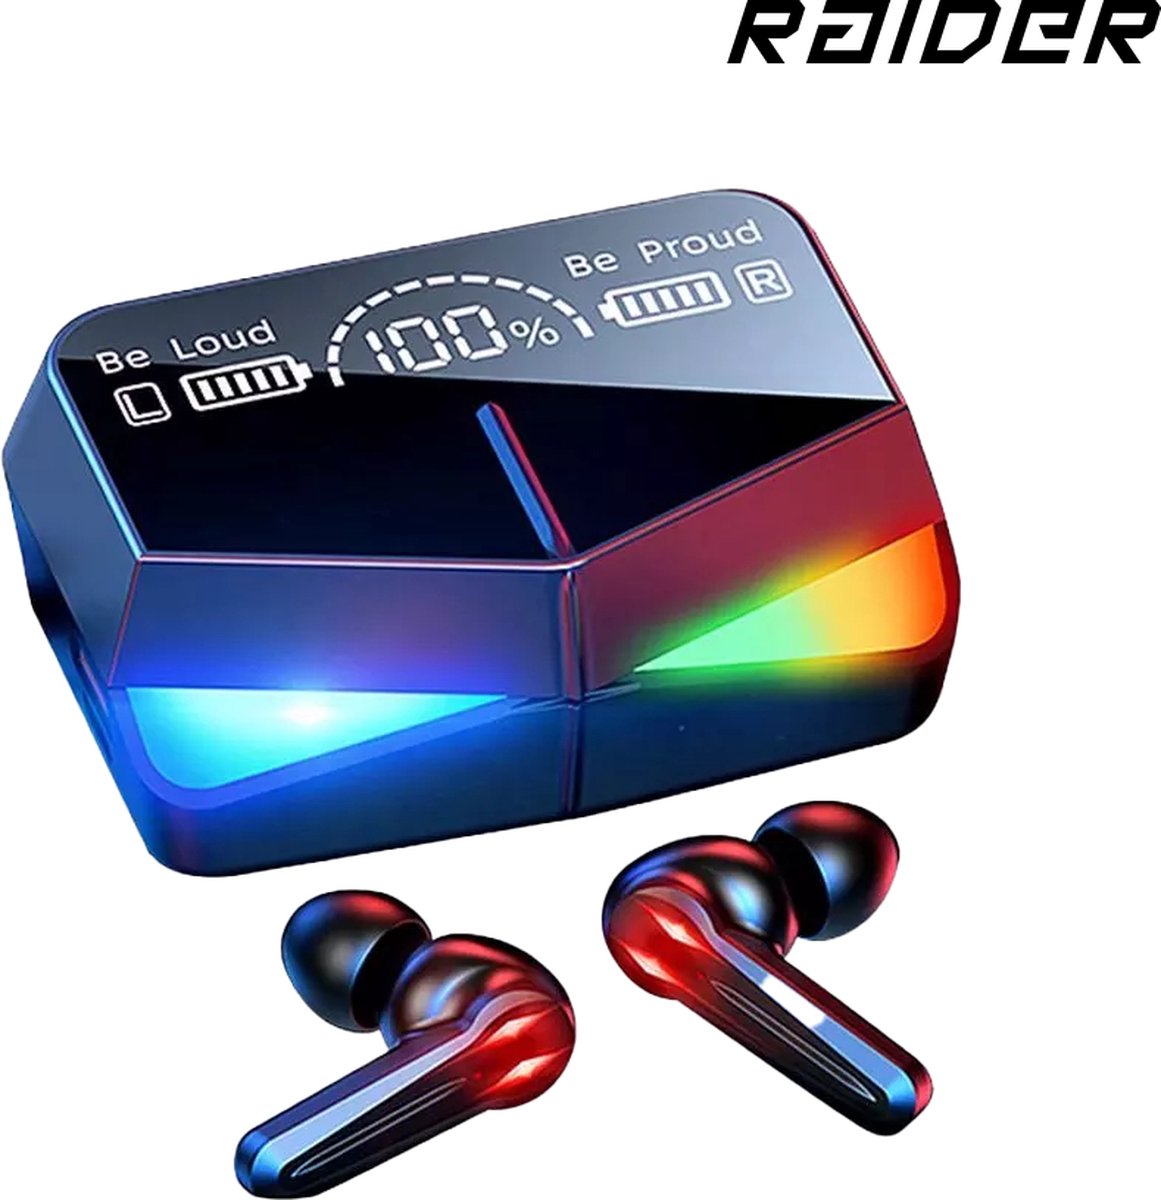 RAIDER EARBUDS ULTRA GAMING - Active Noise Cancelling Oordopjes - Wireless Earbuds - RGB Gaming LED -